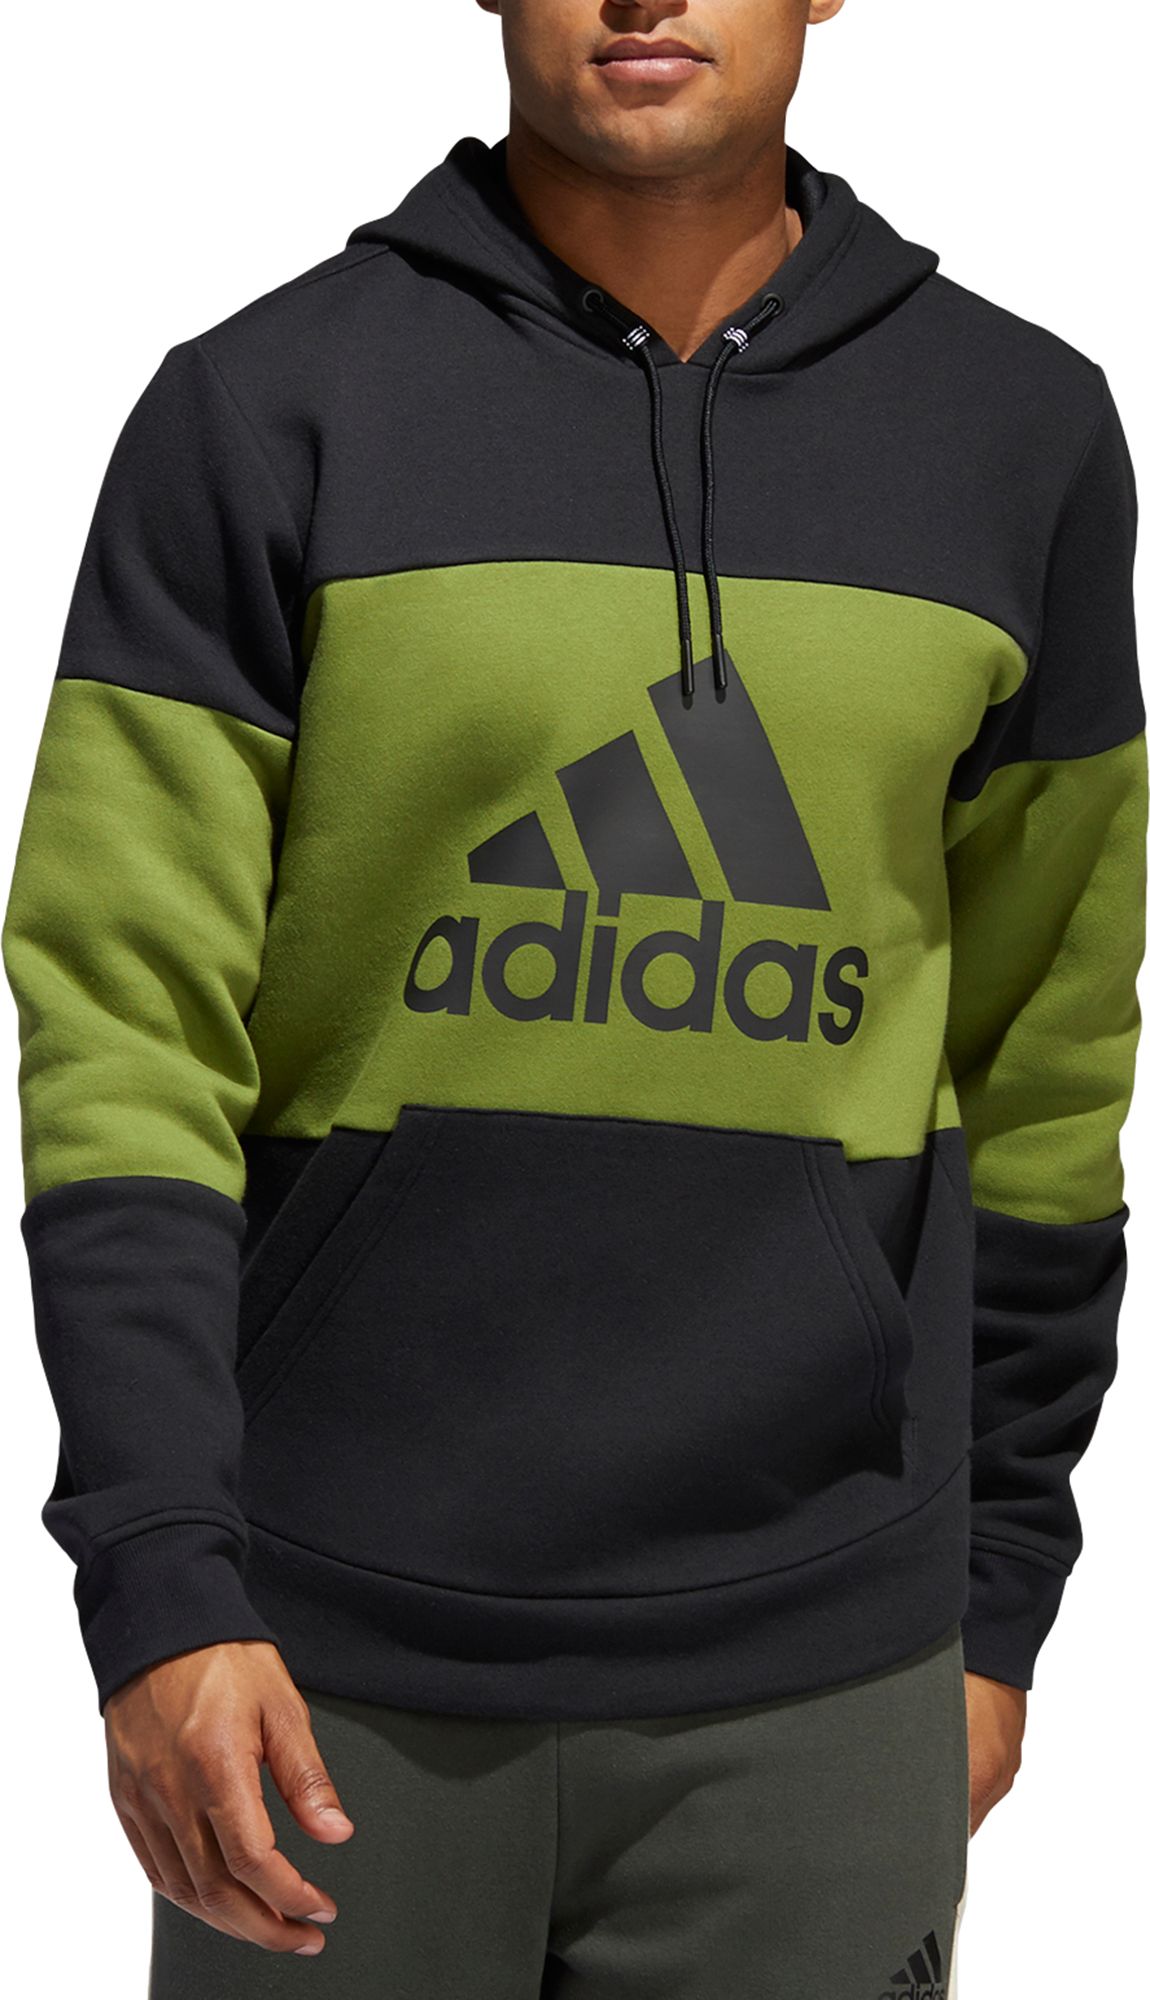 olive green adidas sweater